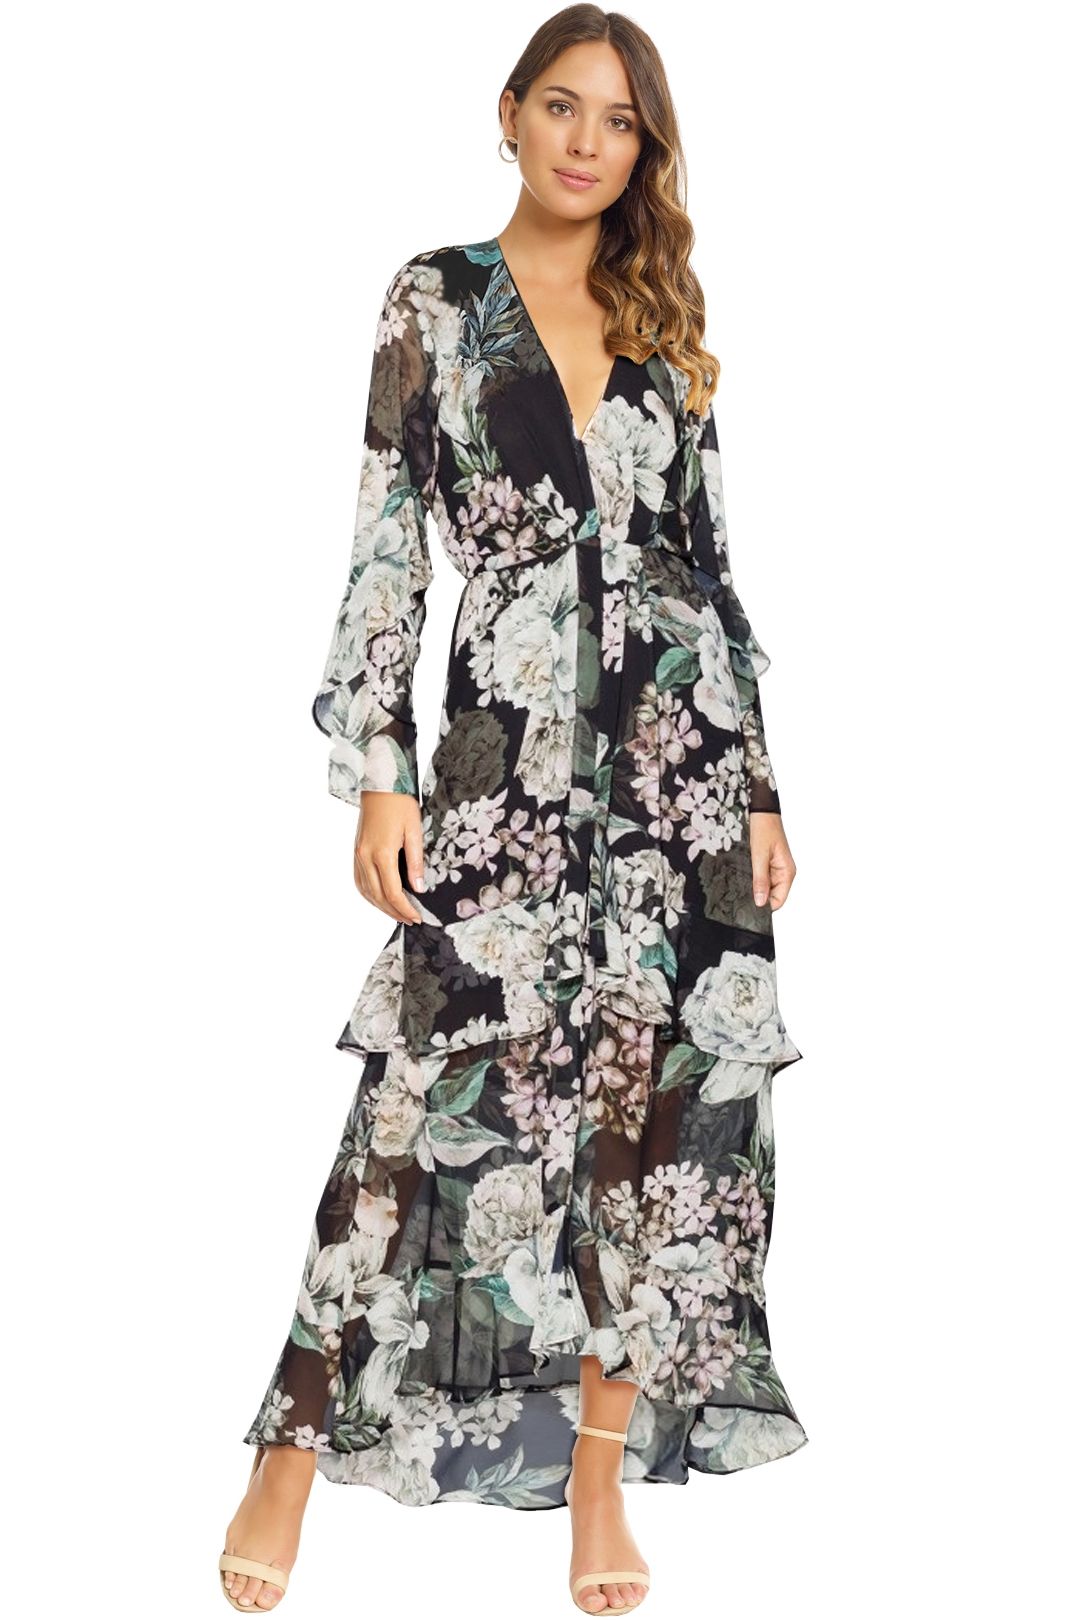 Sheike - Midnight Blooms Dress - Black Floral - Front